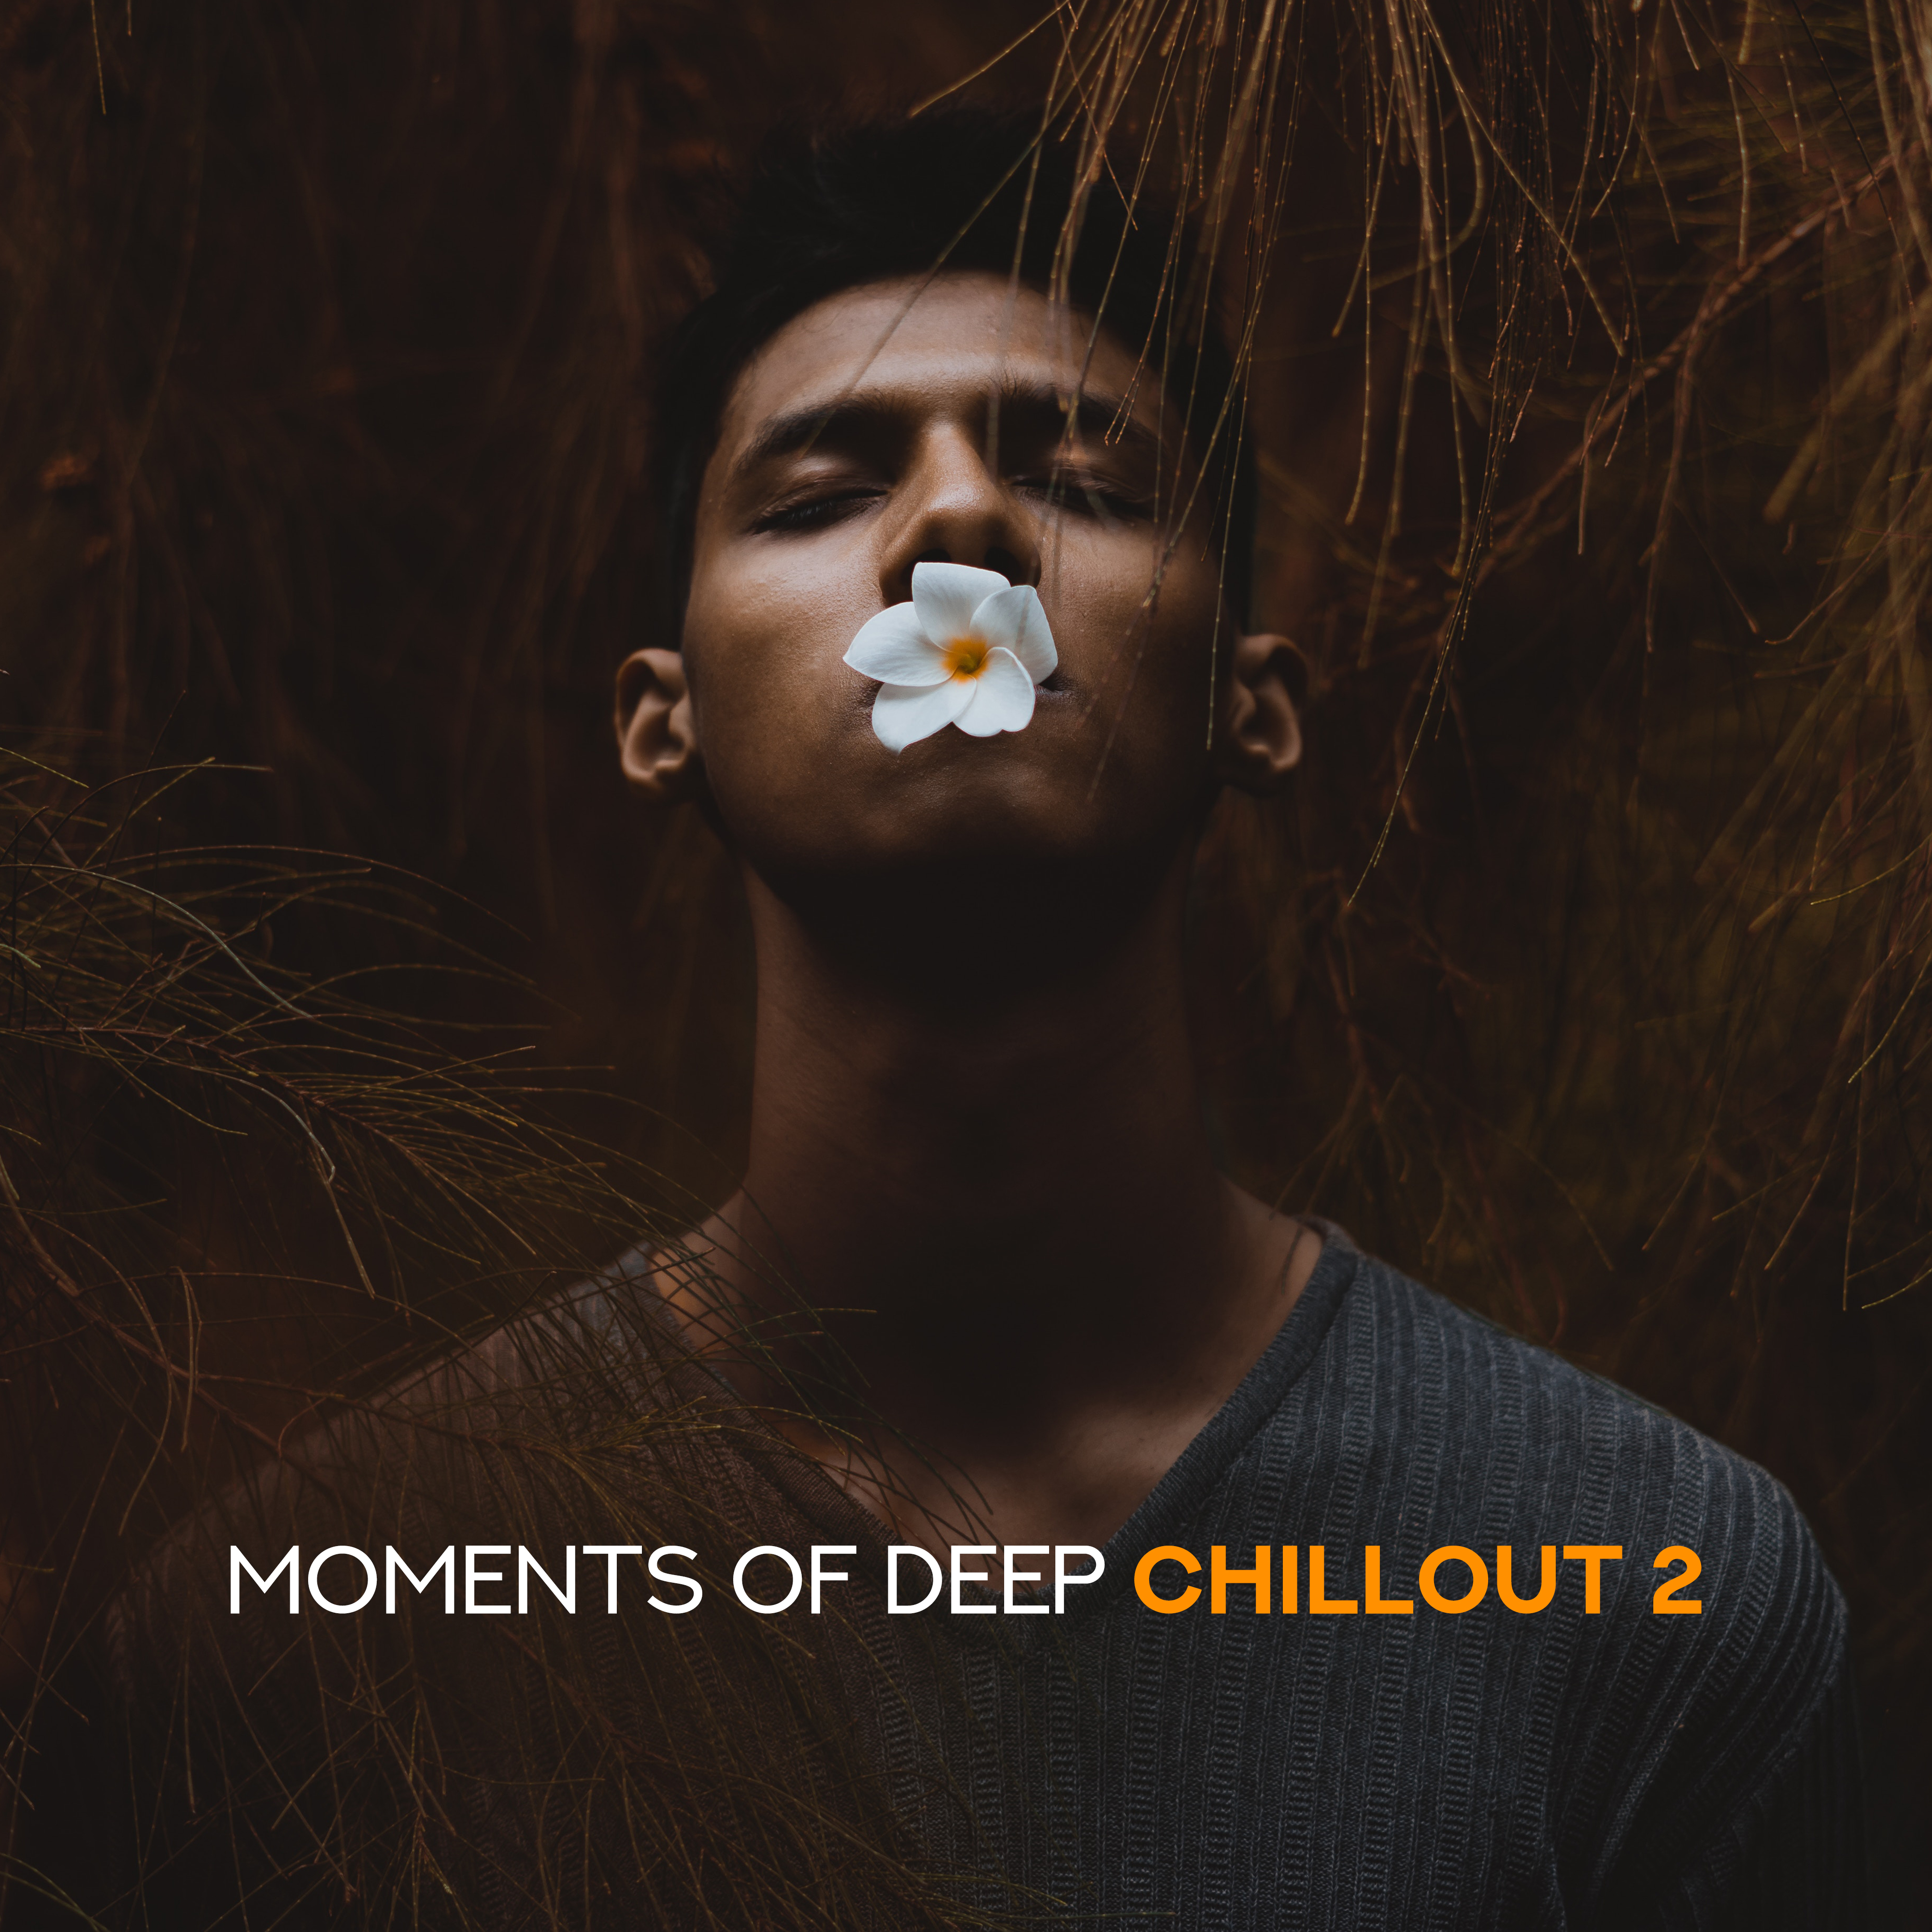 Moments of Deep Chillout 2